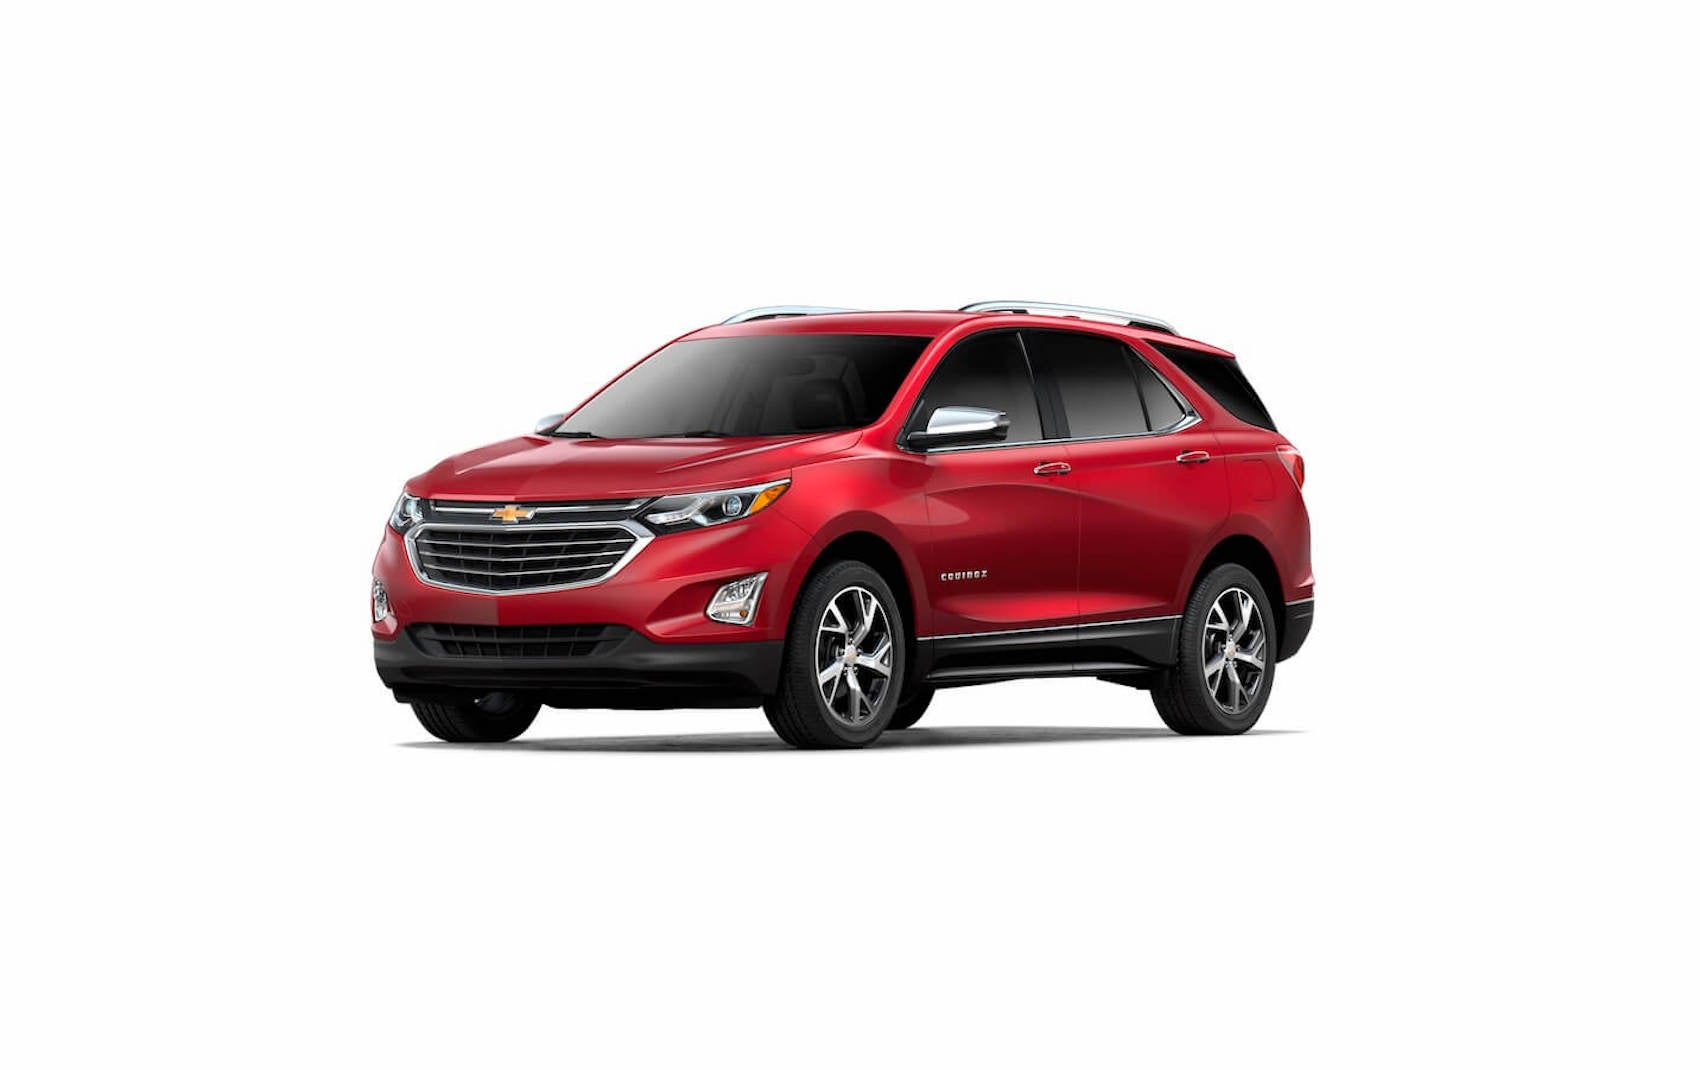 Certified pre-owned Chevy Equinox